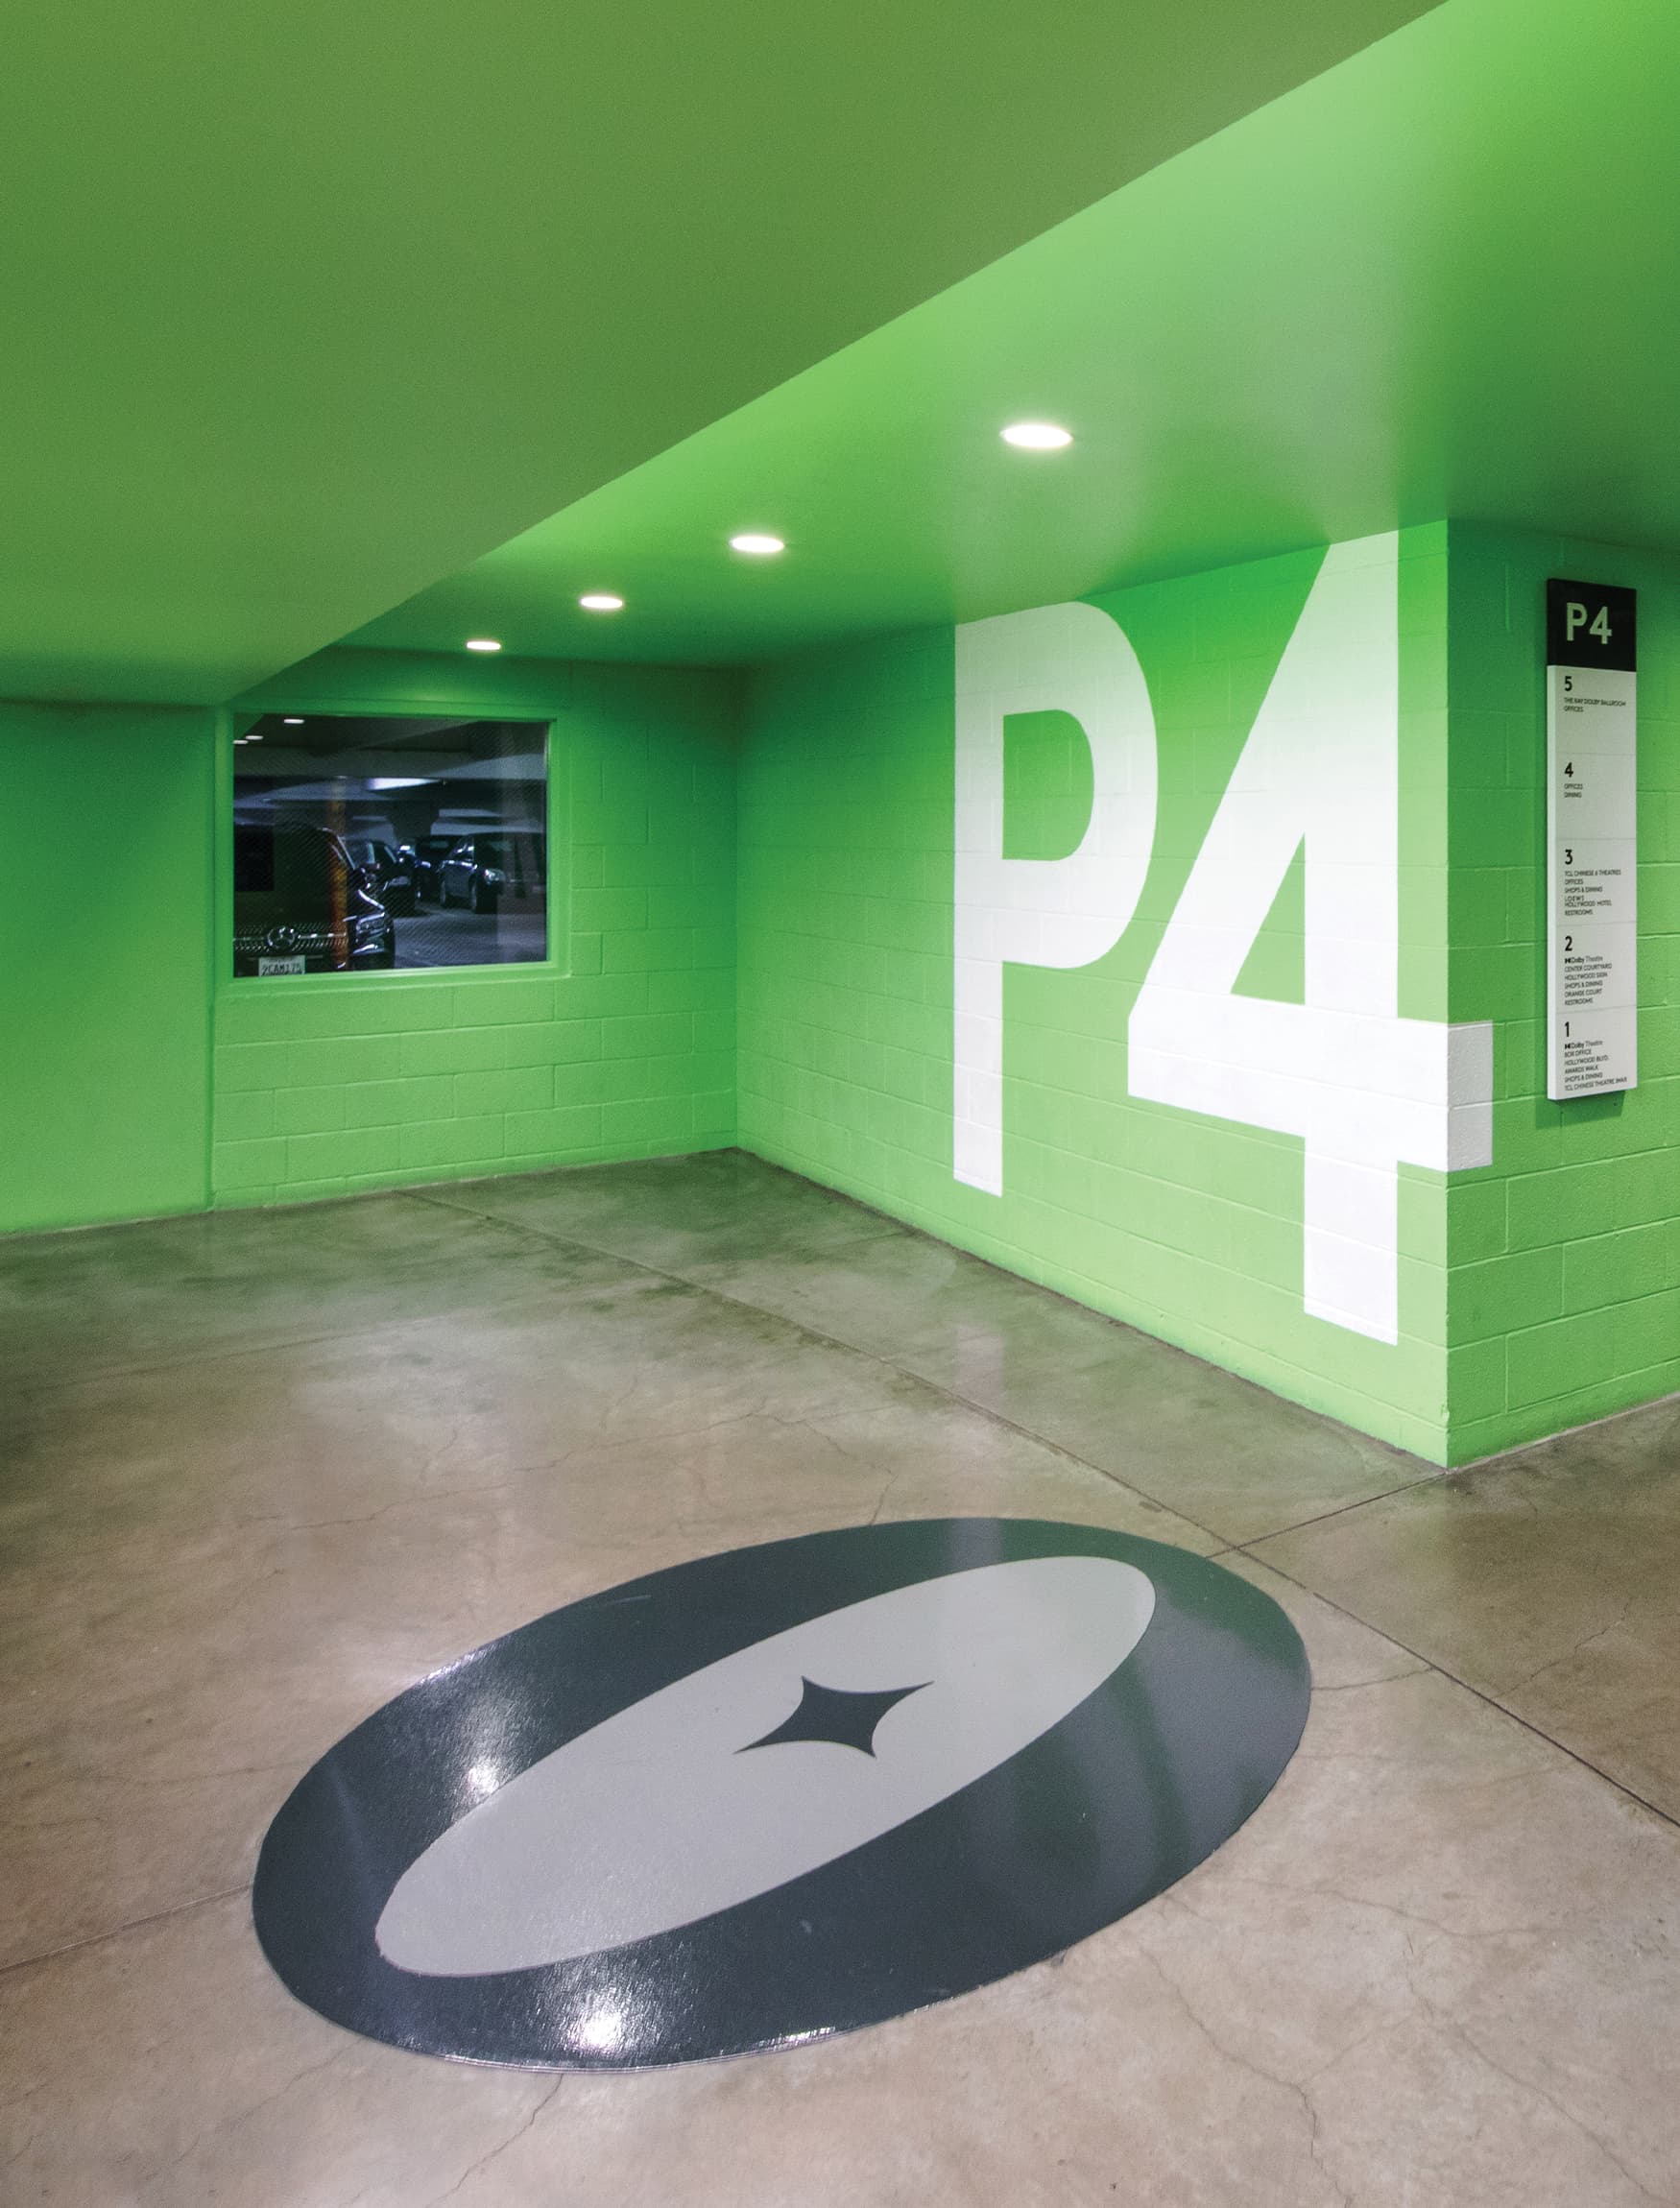 Image of large painted parking garage level identity in white wrapping corner to a wall mounted elevator directory of levels with black and white graphics and a painted Ovation Hollywood "O" icon logo on the ground by RSM Design for Ovation Hollywood in Los Angeles, California.